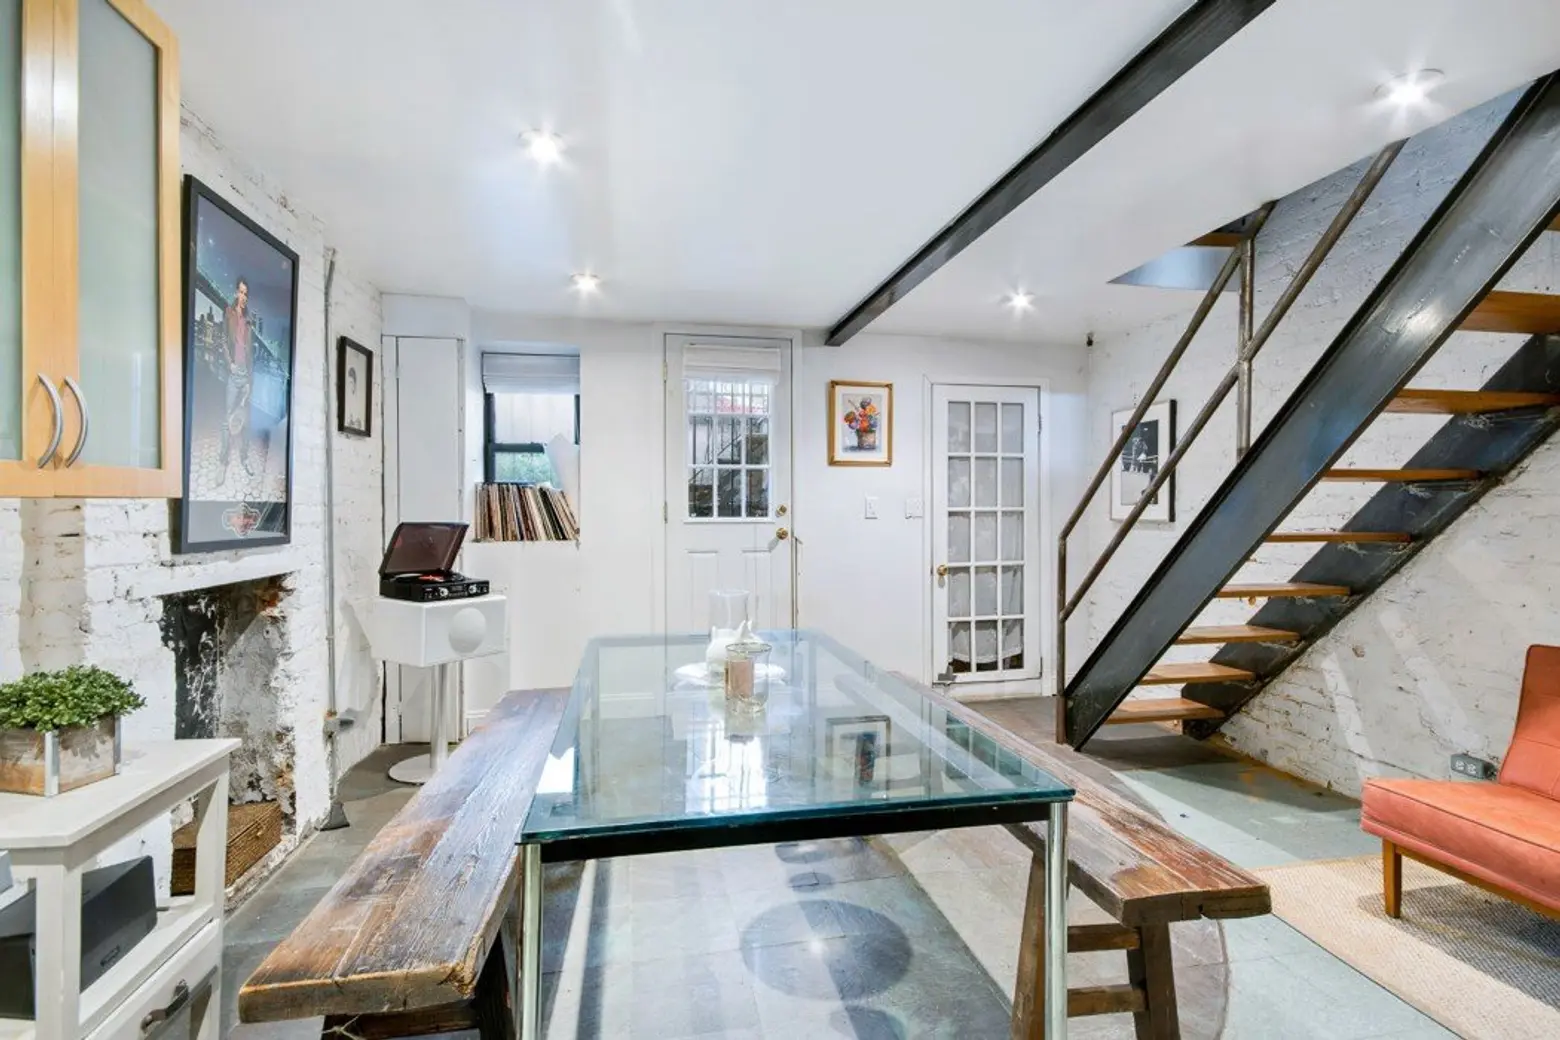 This brick townhouse with romantic backyard and guest house asks $1.495M in Gowanus